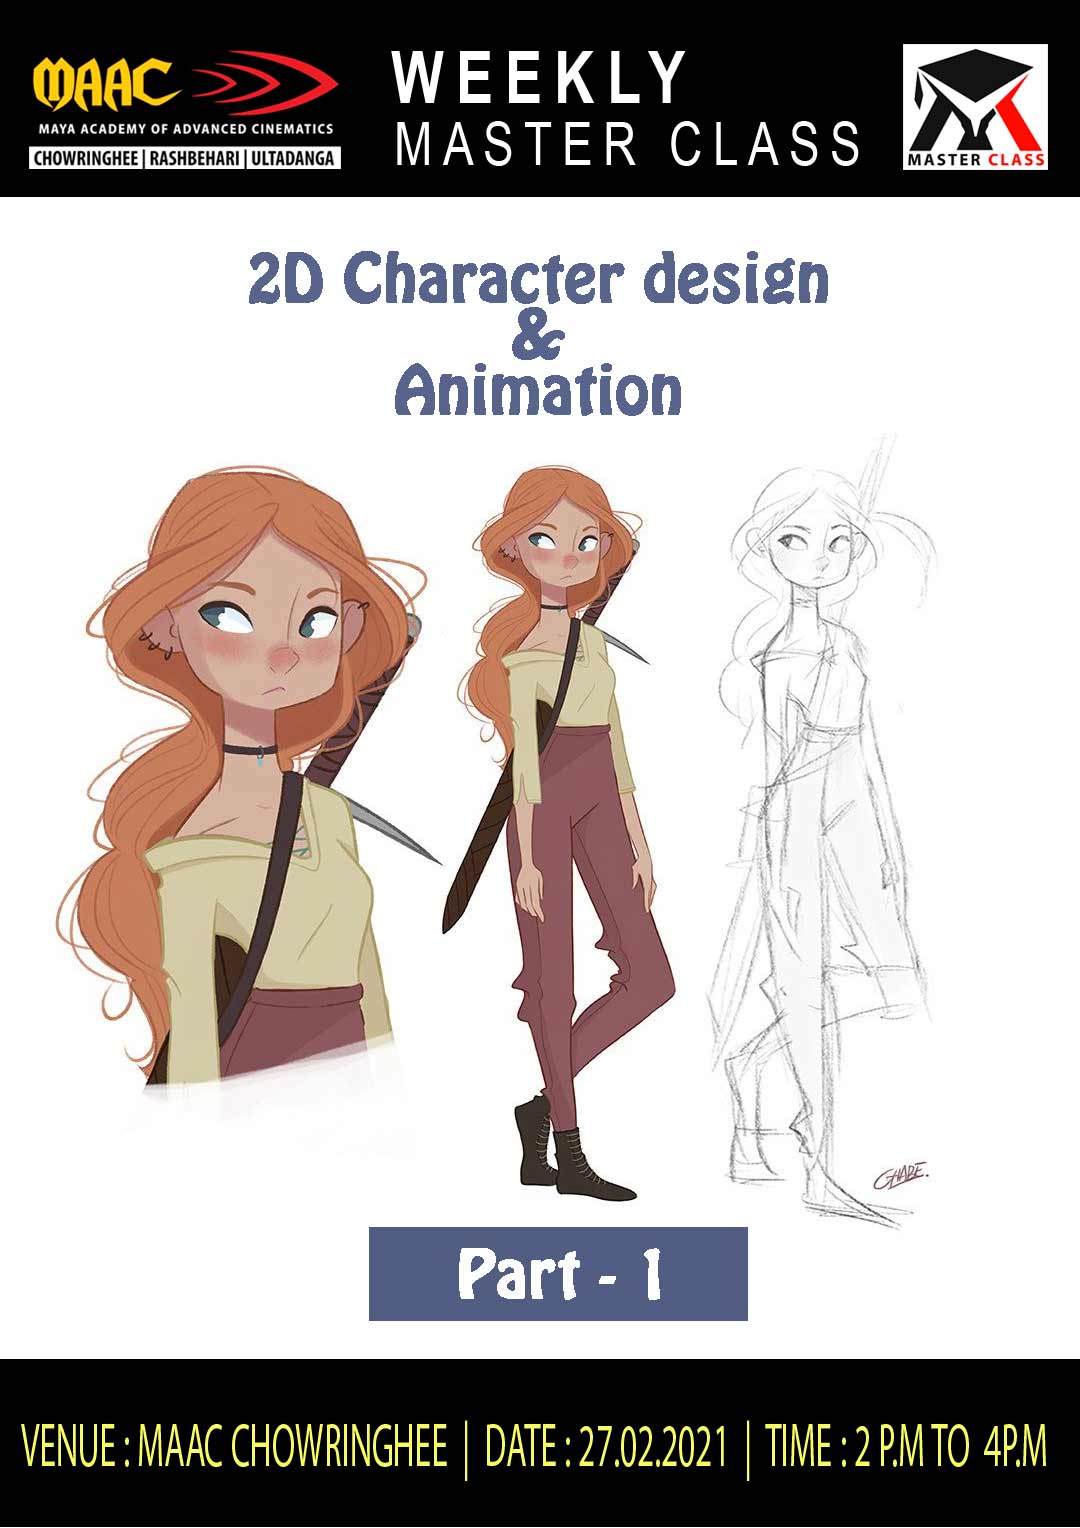 Weekly Master Class on 2D Character Design & Animation